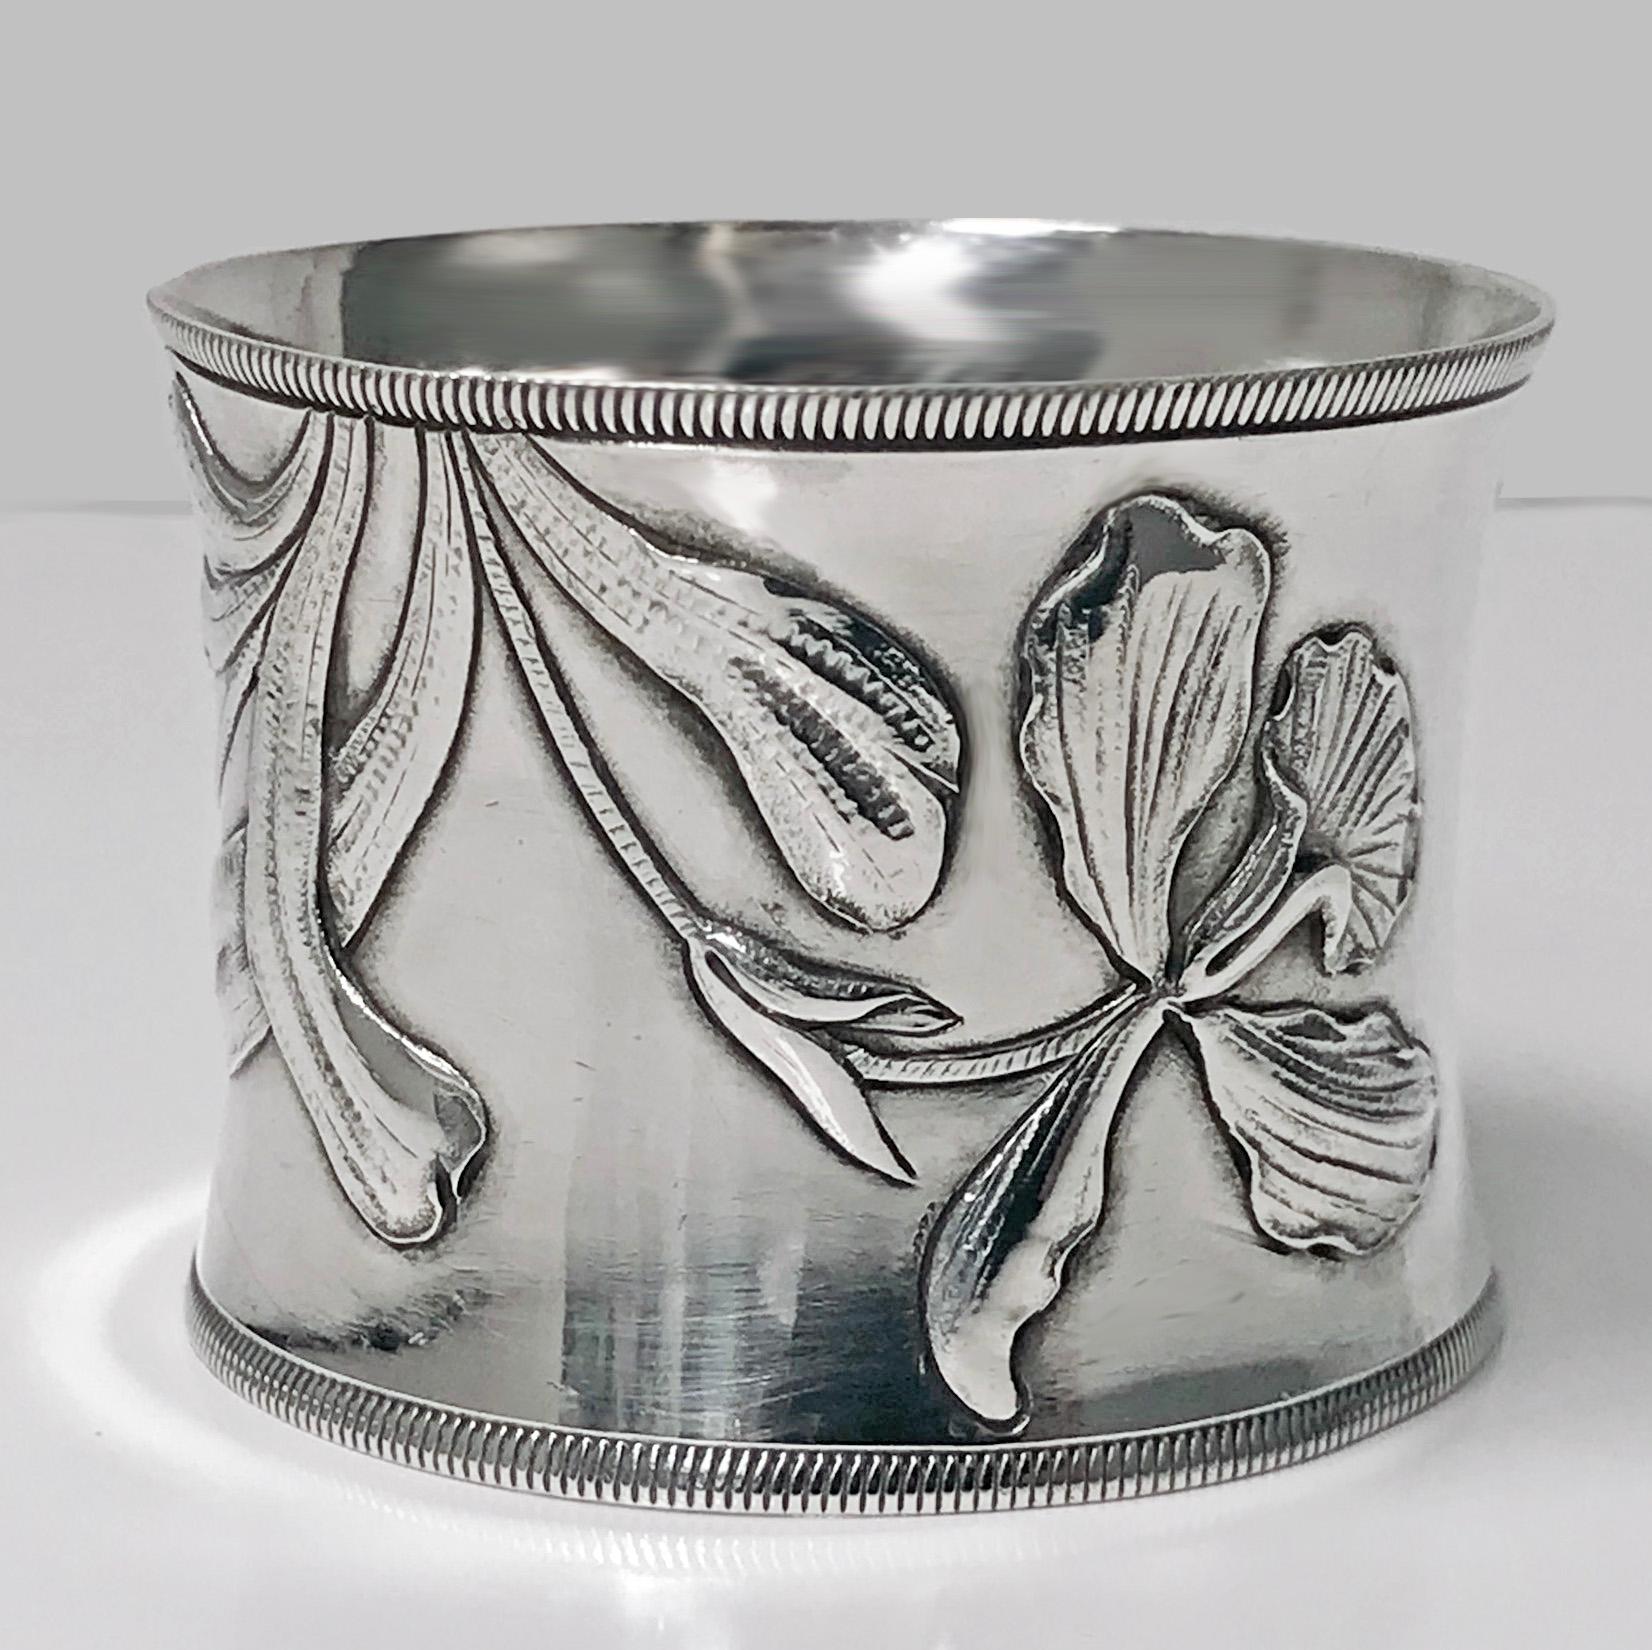 Large French Art Nouveau silver first standard Serviette ring, hallmarked with Minerva head and master stamp of Claude Doutre Roussel. This well-known French silversmith was active in Paris between 1895 and 1911. Import marks for Glasgow 1903.